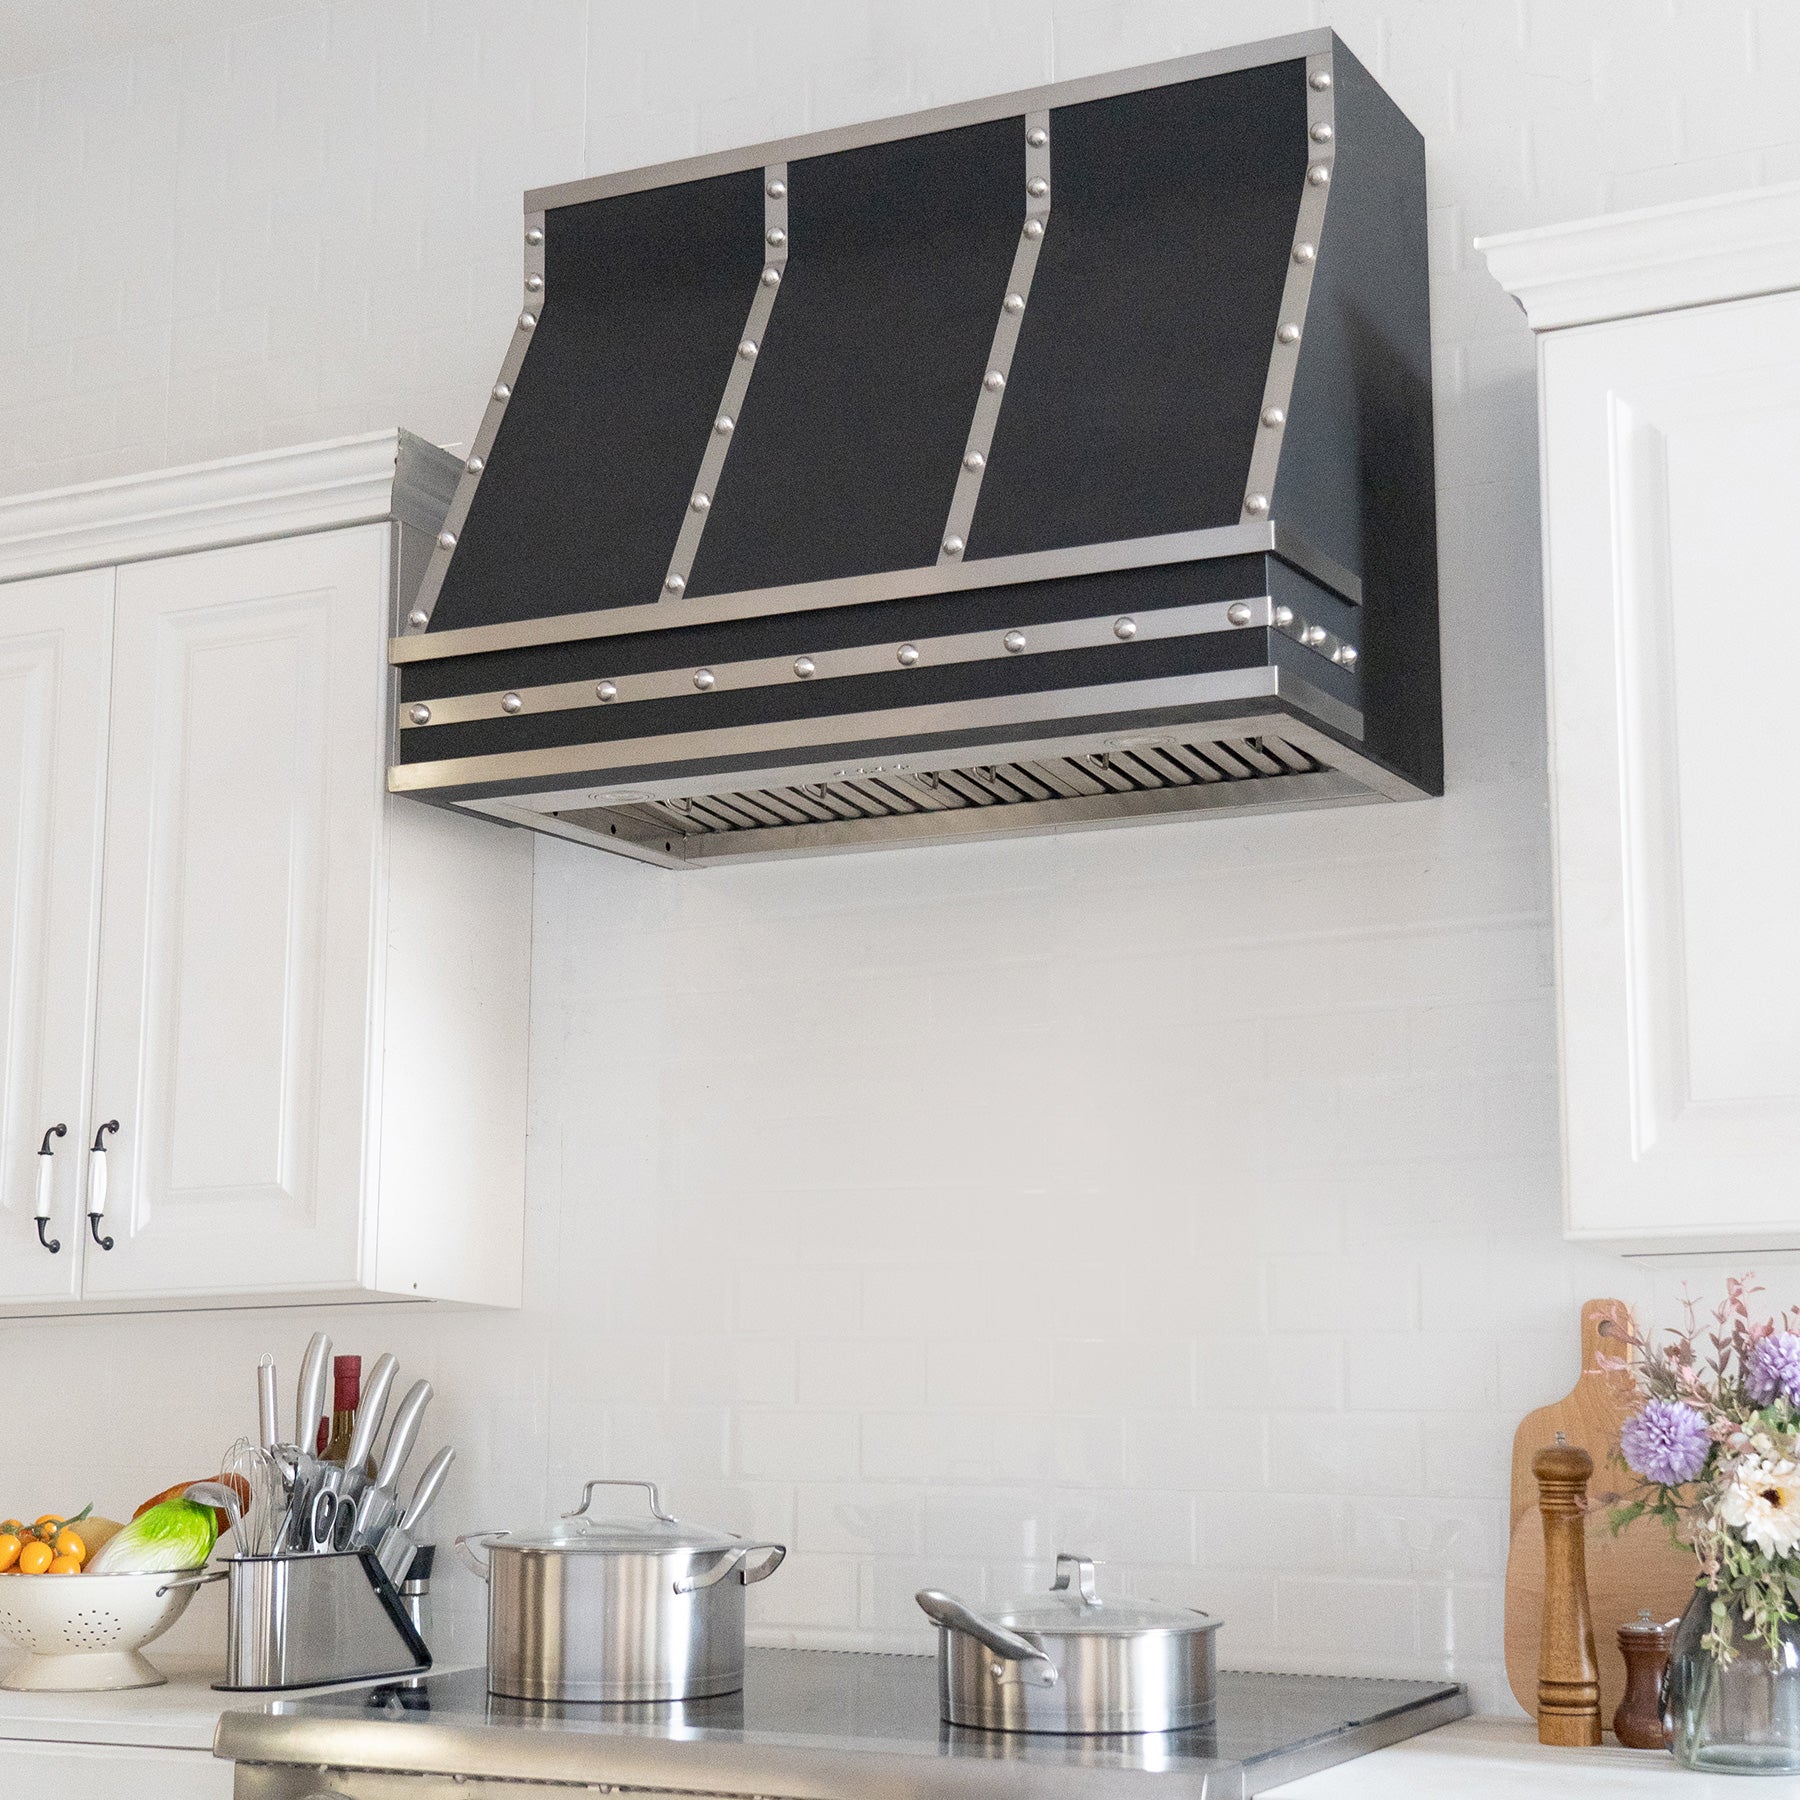 Fobest Handcrafted Black Stainless Steel Range Hood wiht straps and rivets in kitchen FSS-76 - hood model